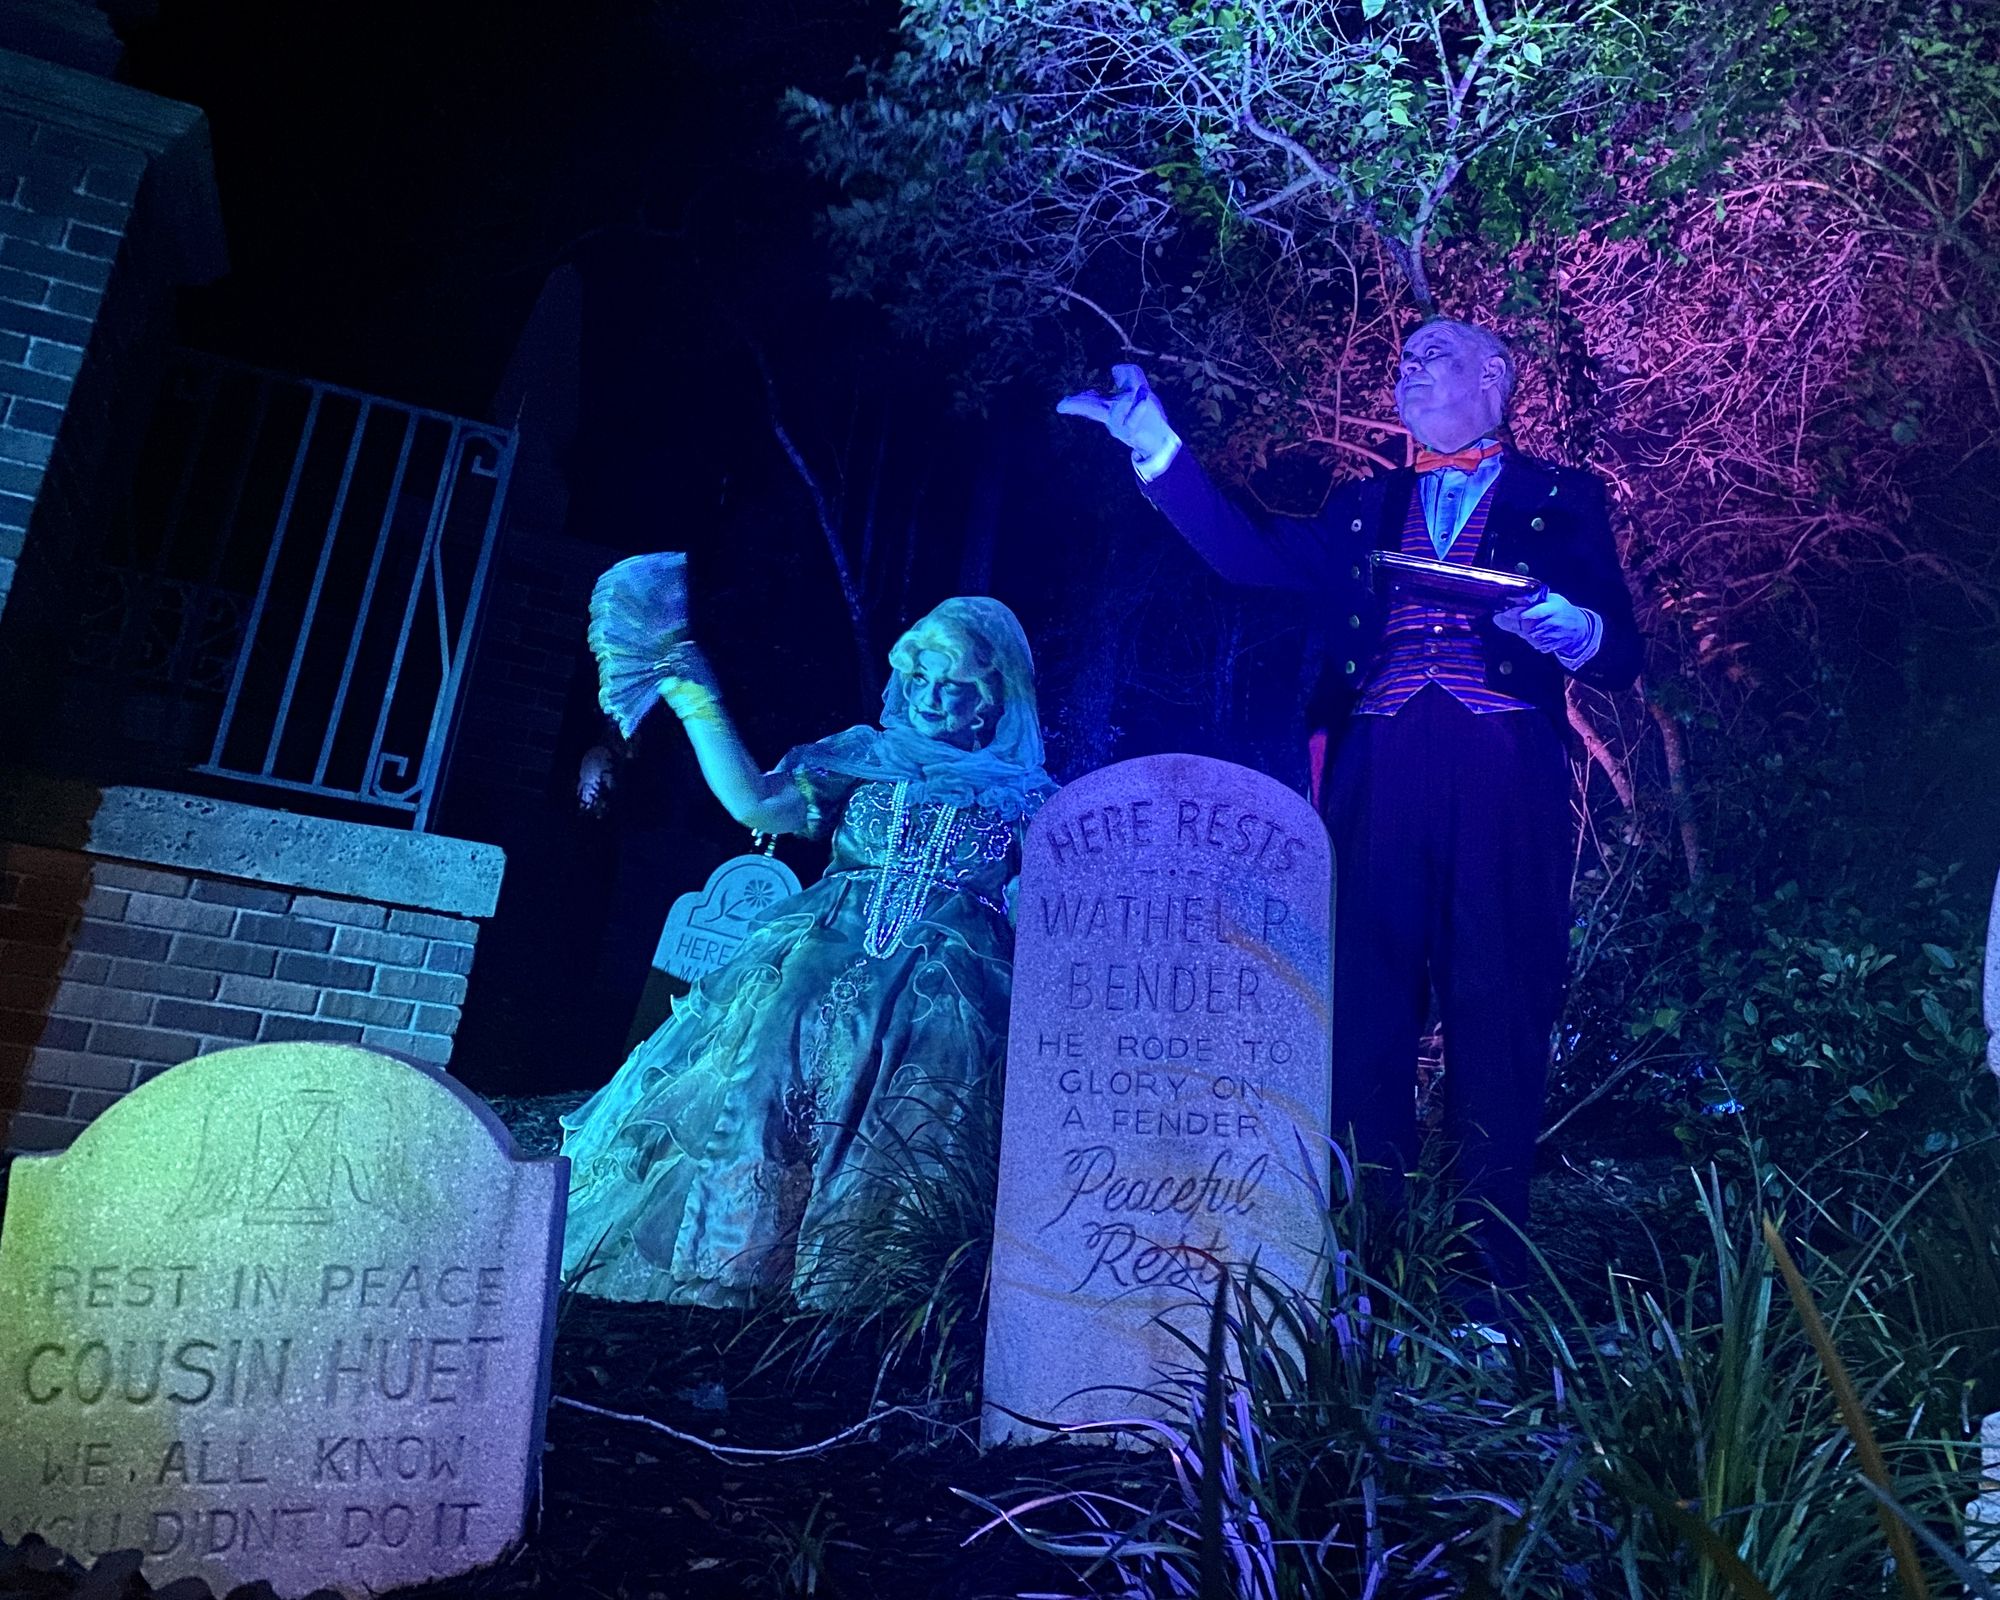 Live actors at Disney World's Haunted Mansion, dressed as a fine lady and a butler, lit in dramatic green and purple, next to tombstones